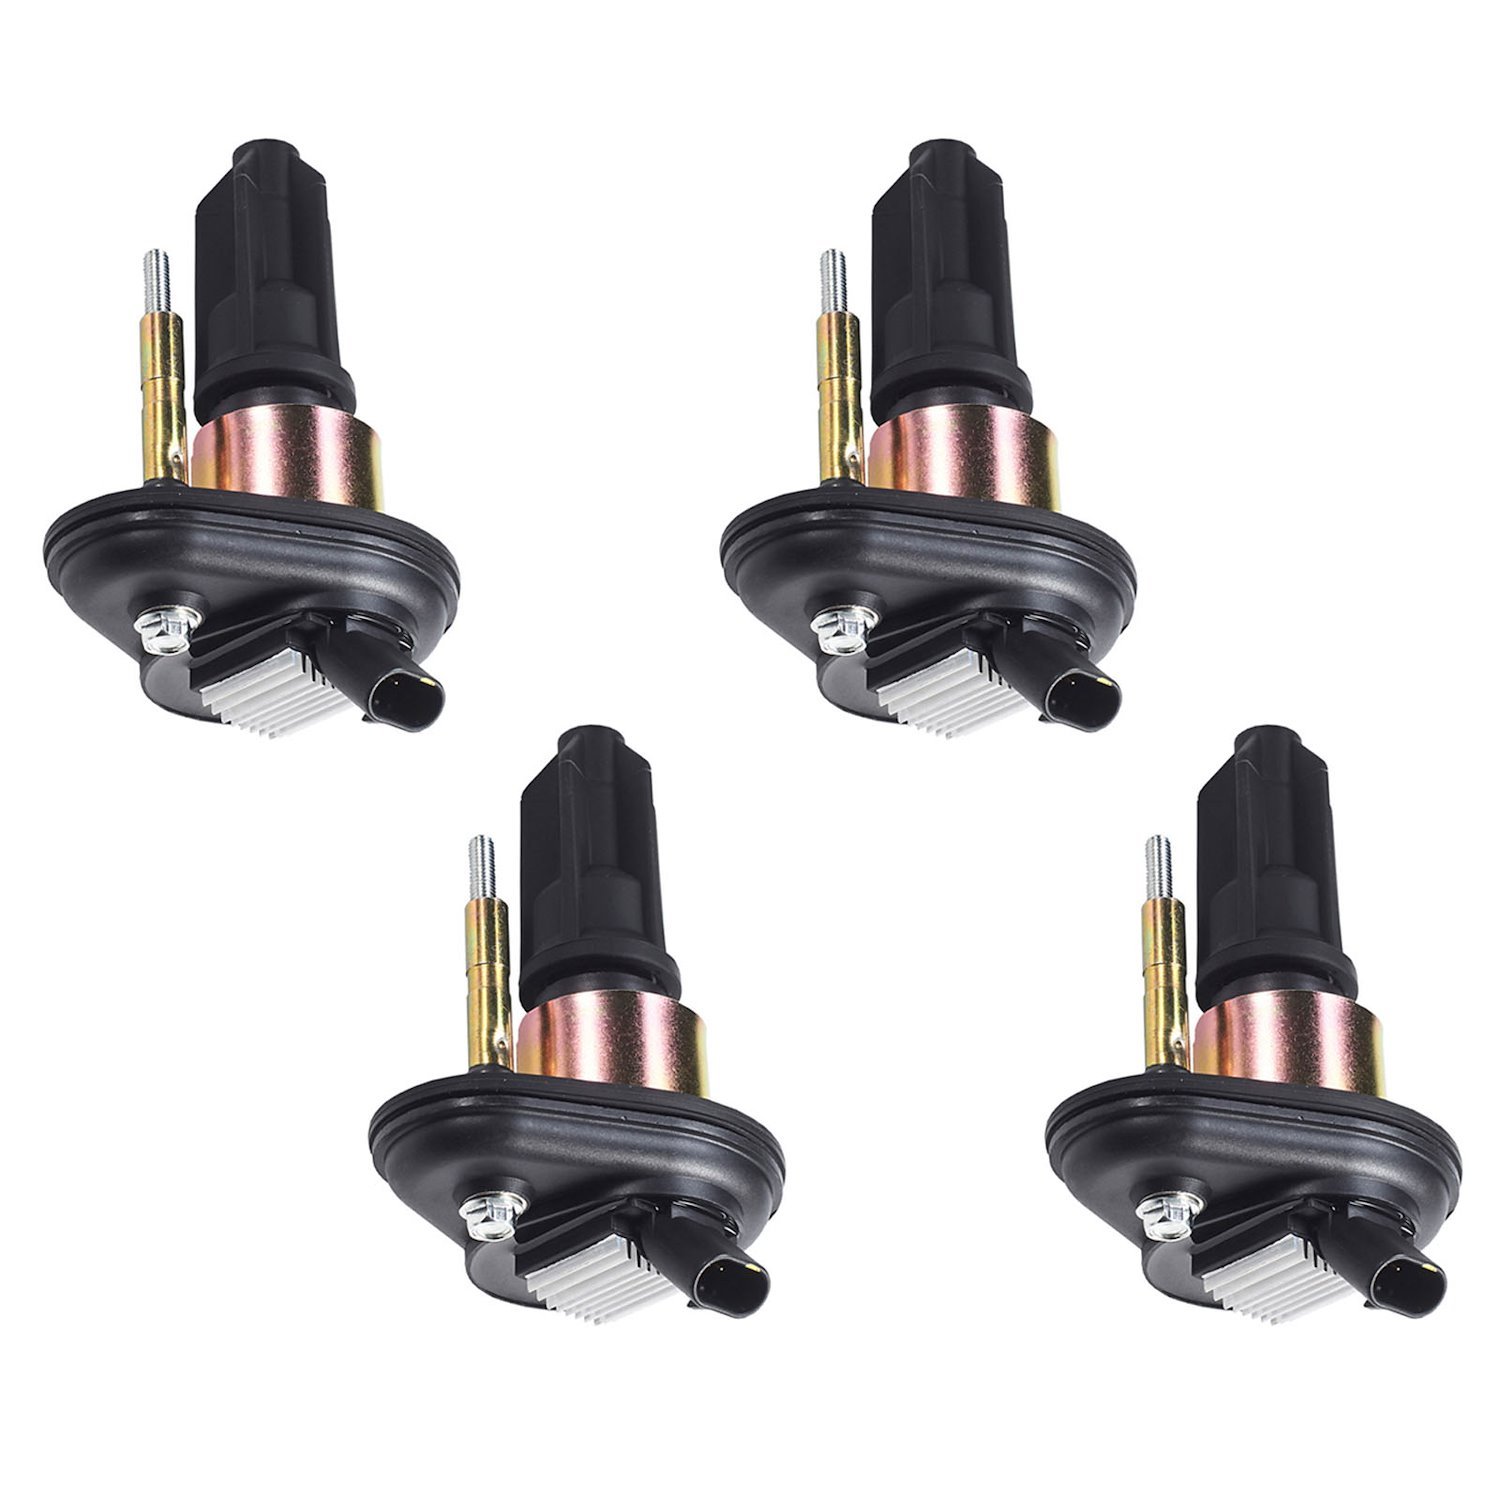 OE Replacement Ignition Coils for 2002-2005 Chevy Trailblazer, GMC Canyon/Envoy